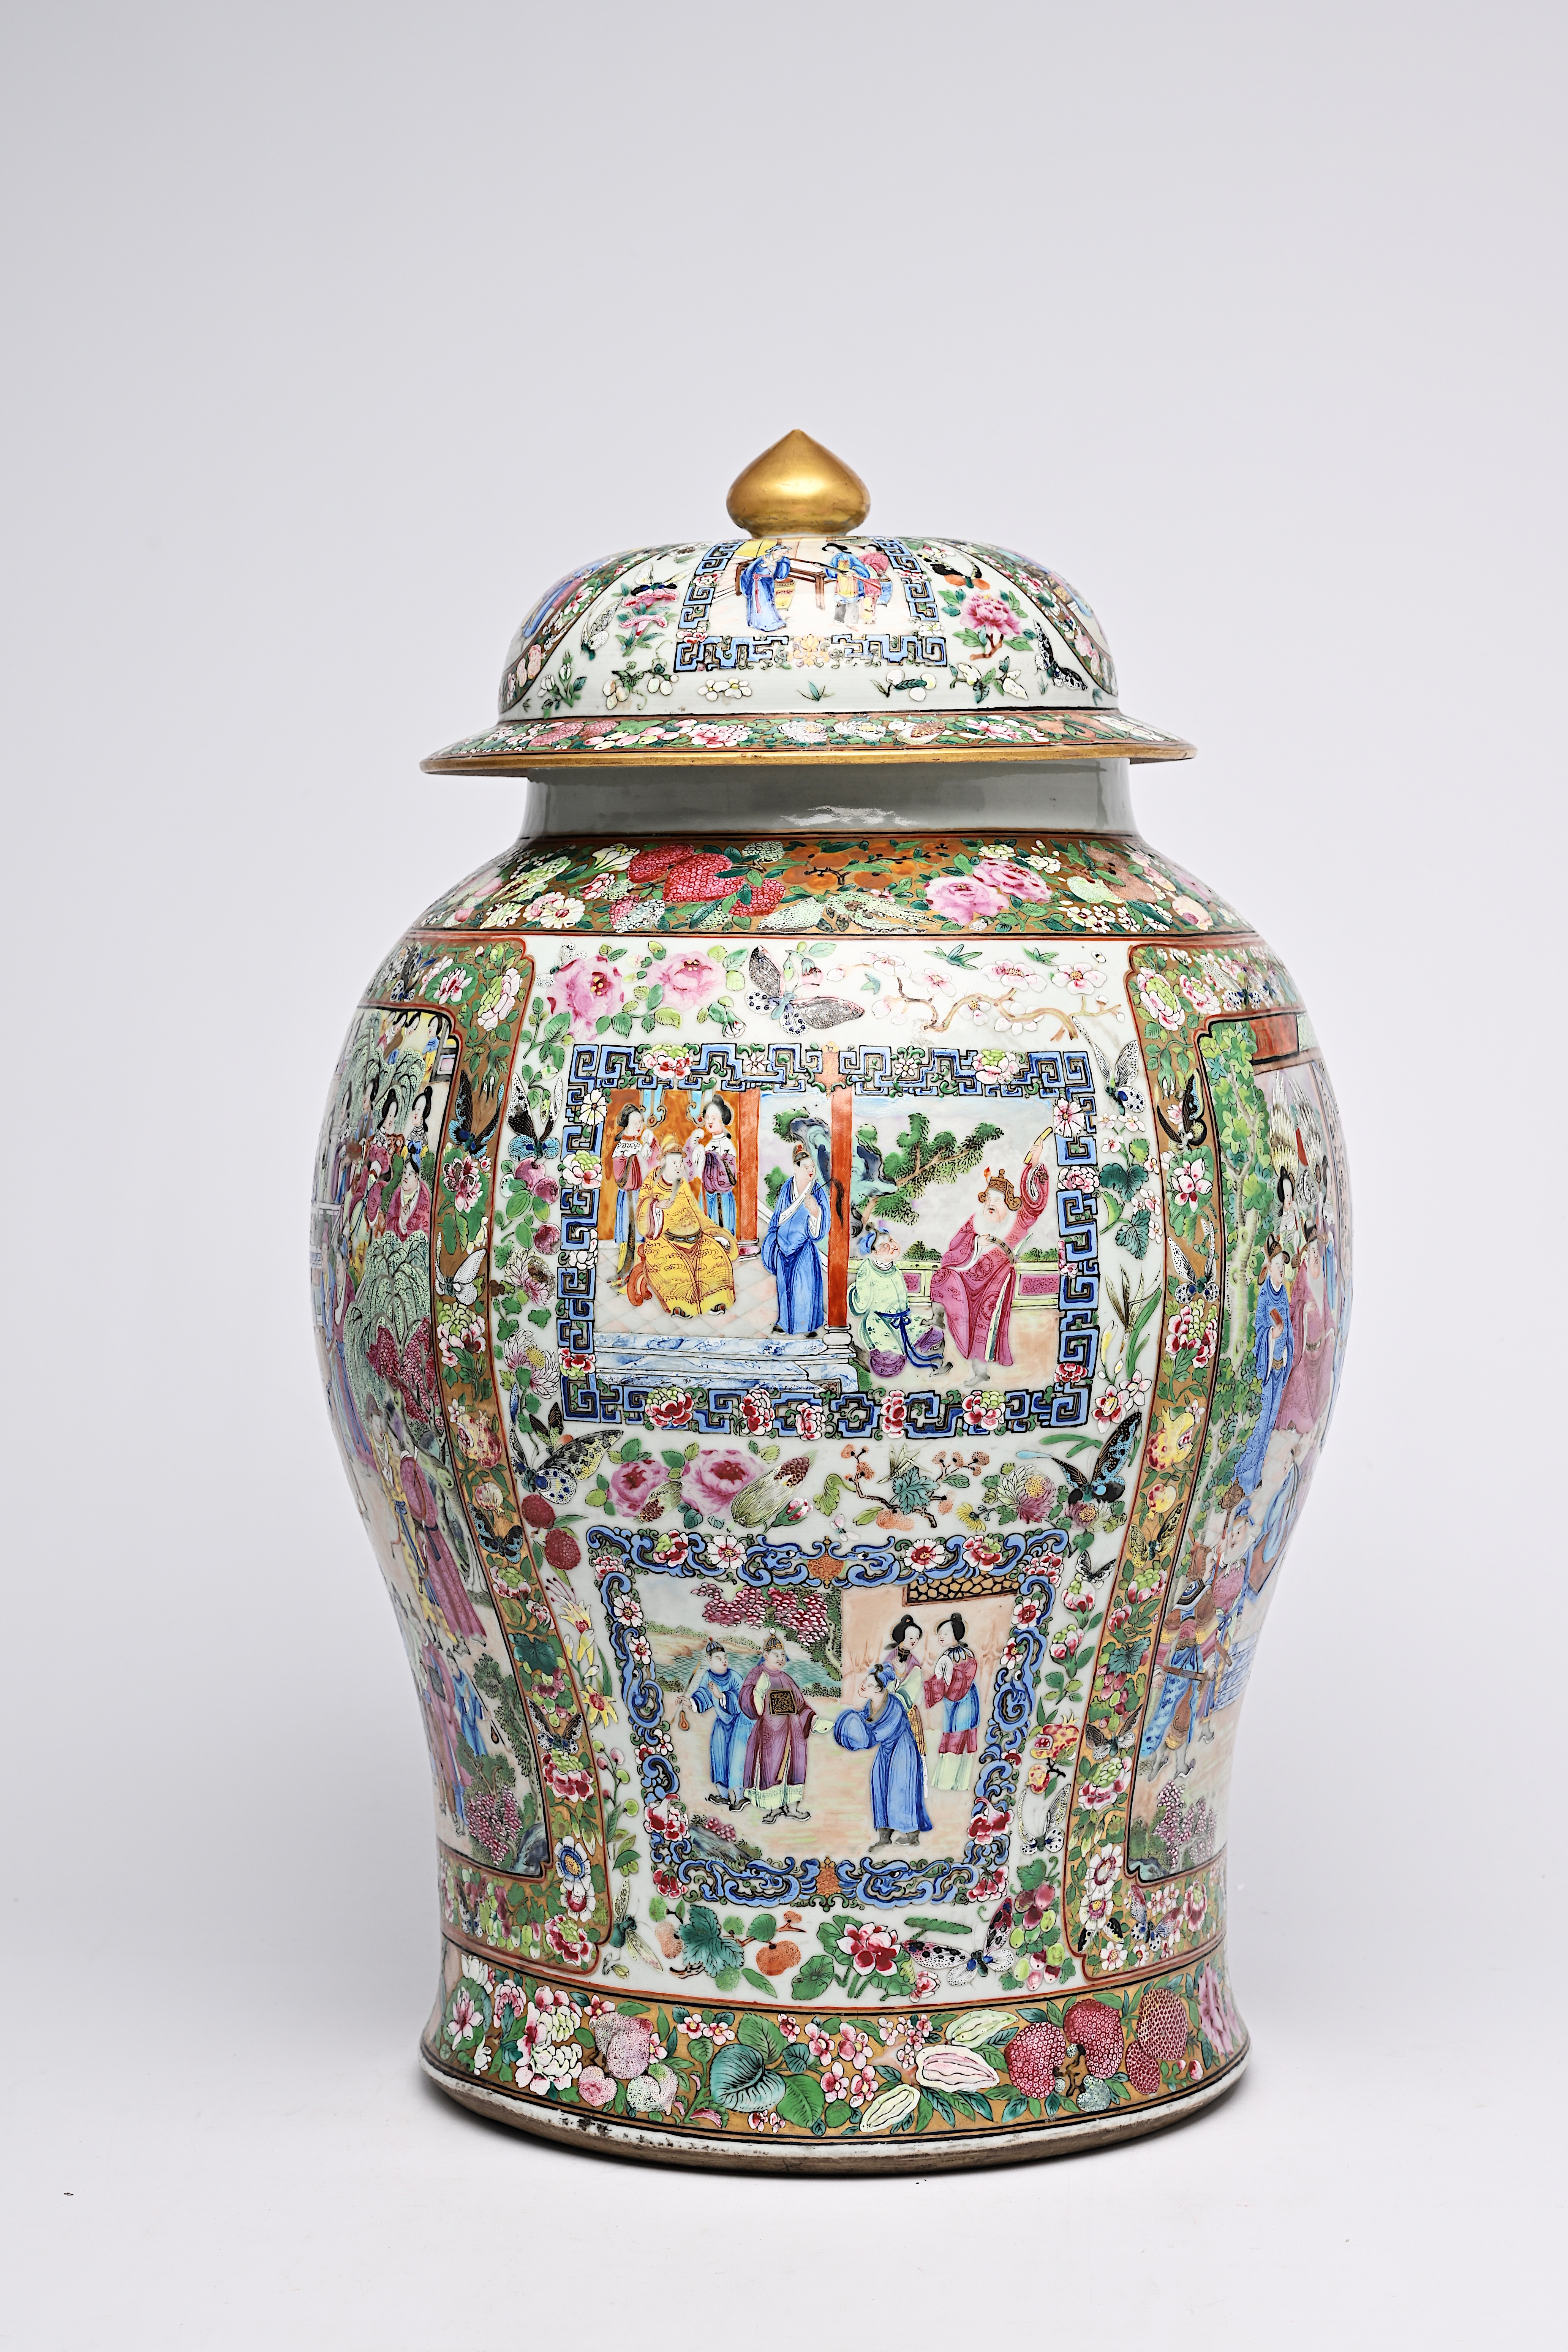 A fine Chinese Canton famille rose vase and cover with palace scenes and floral design, 19th C. - Image 5 of 9